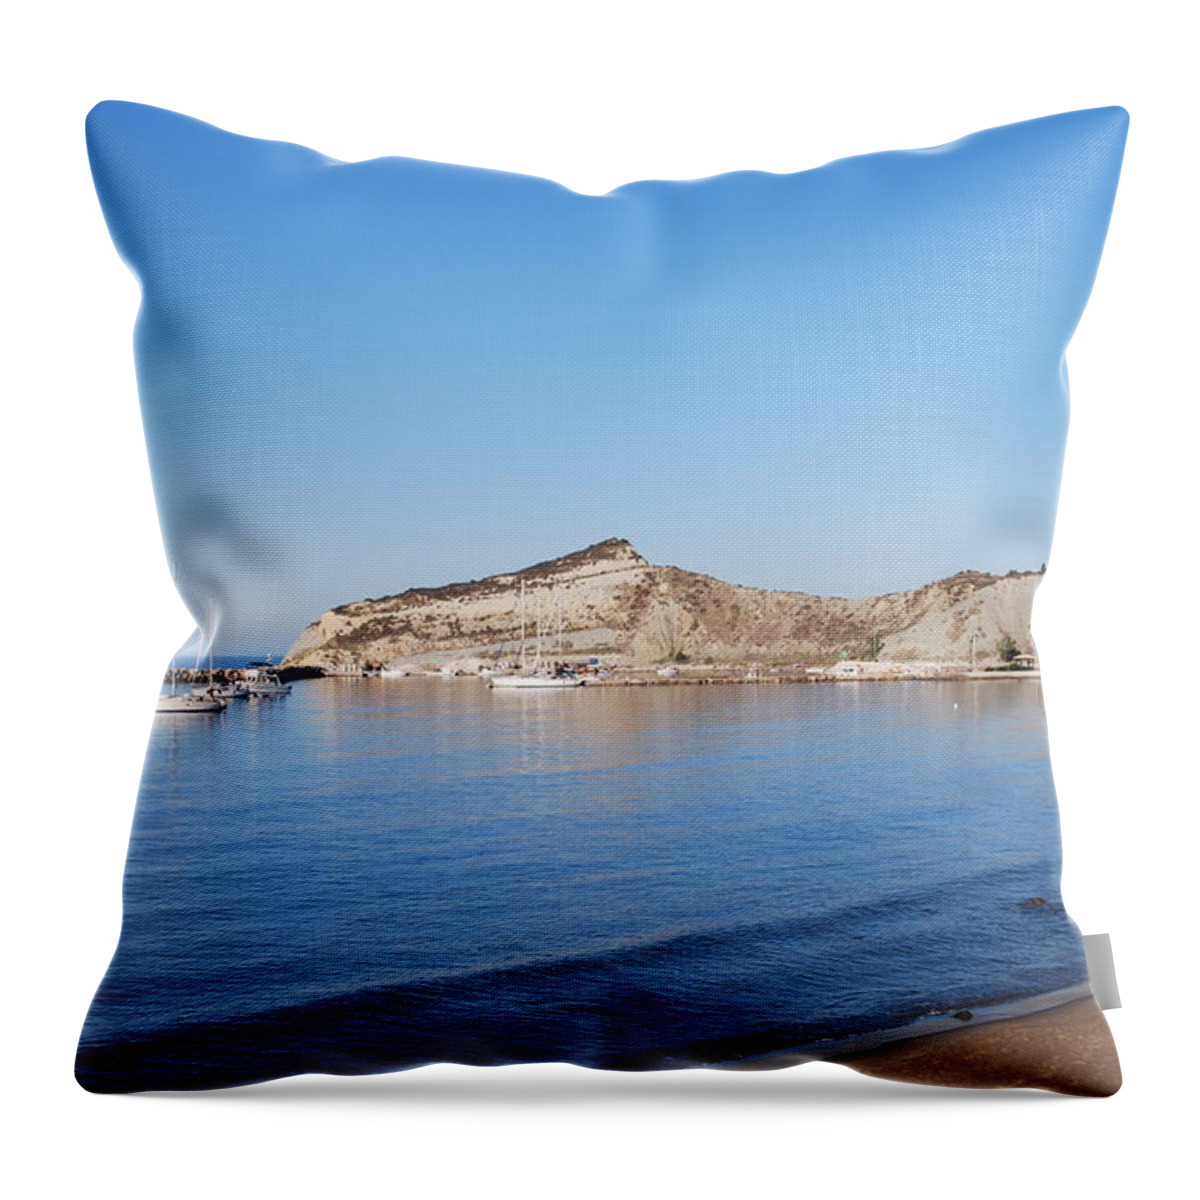 Erikousa Throw Pillow featuring the photograph Blue Water by George Katechis